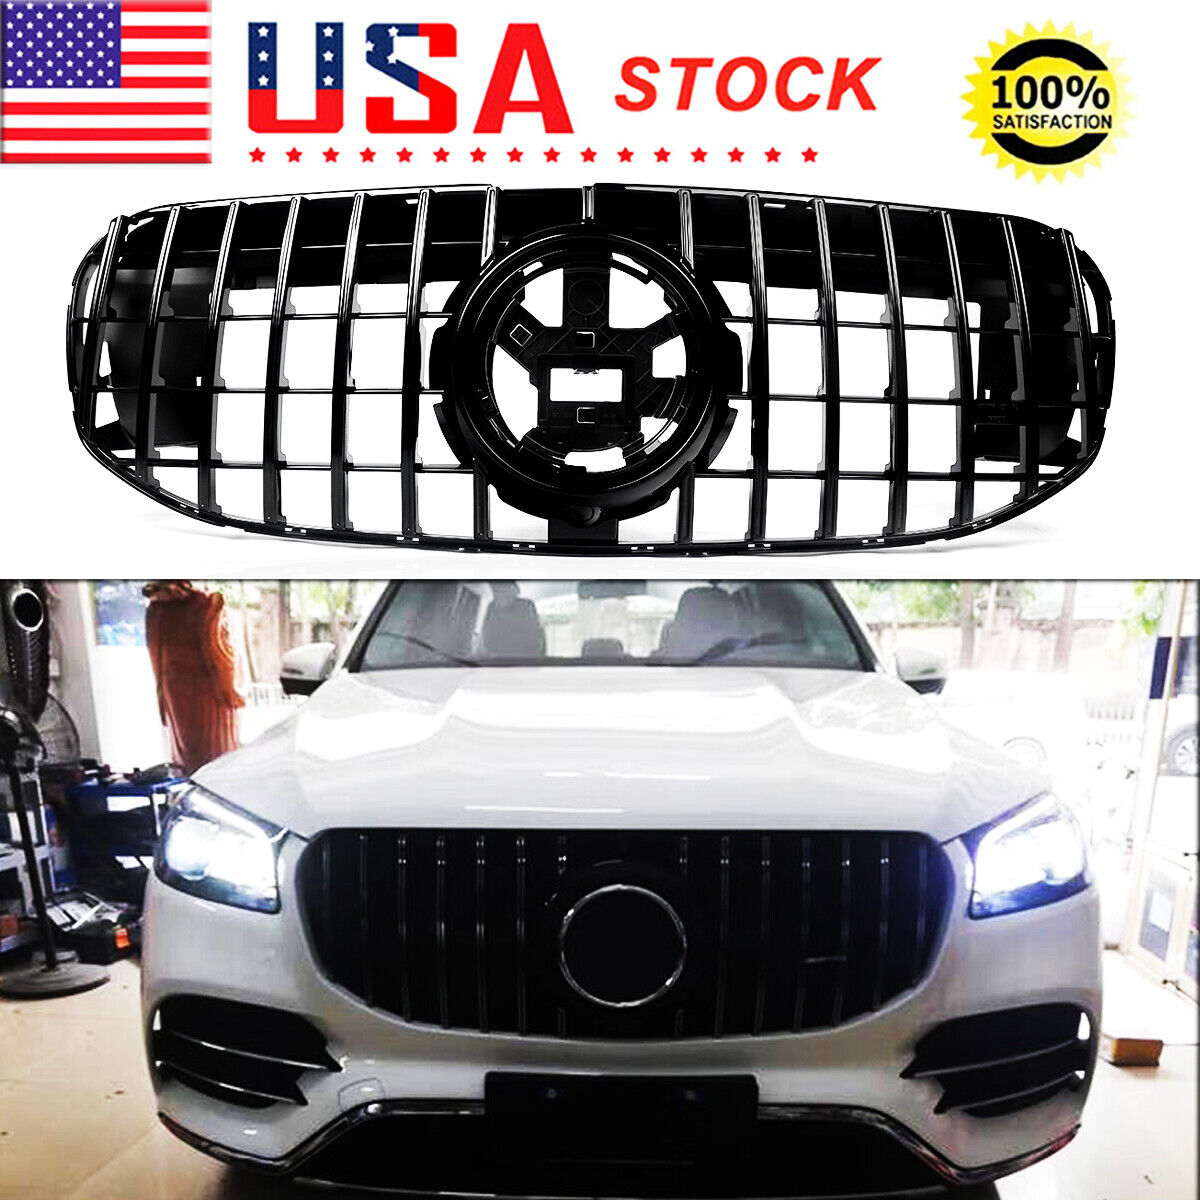 GLS63 AMG Style Black GTR Grille with Bracket For Benz X167 GLS CLASS SUV 2020+